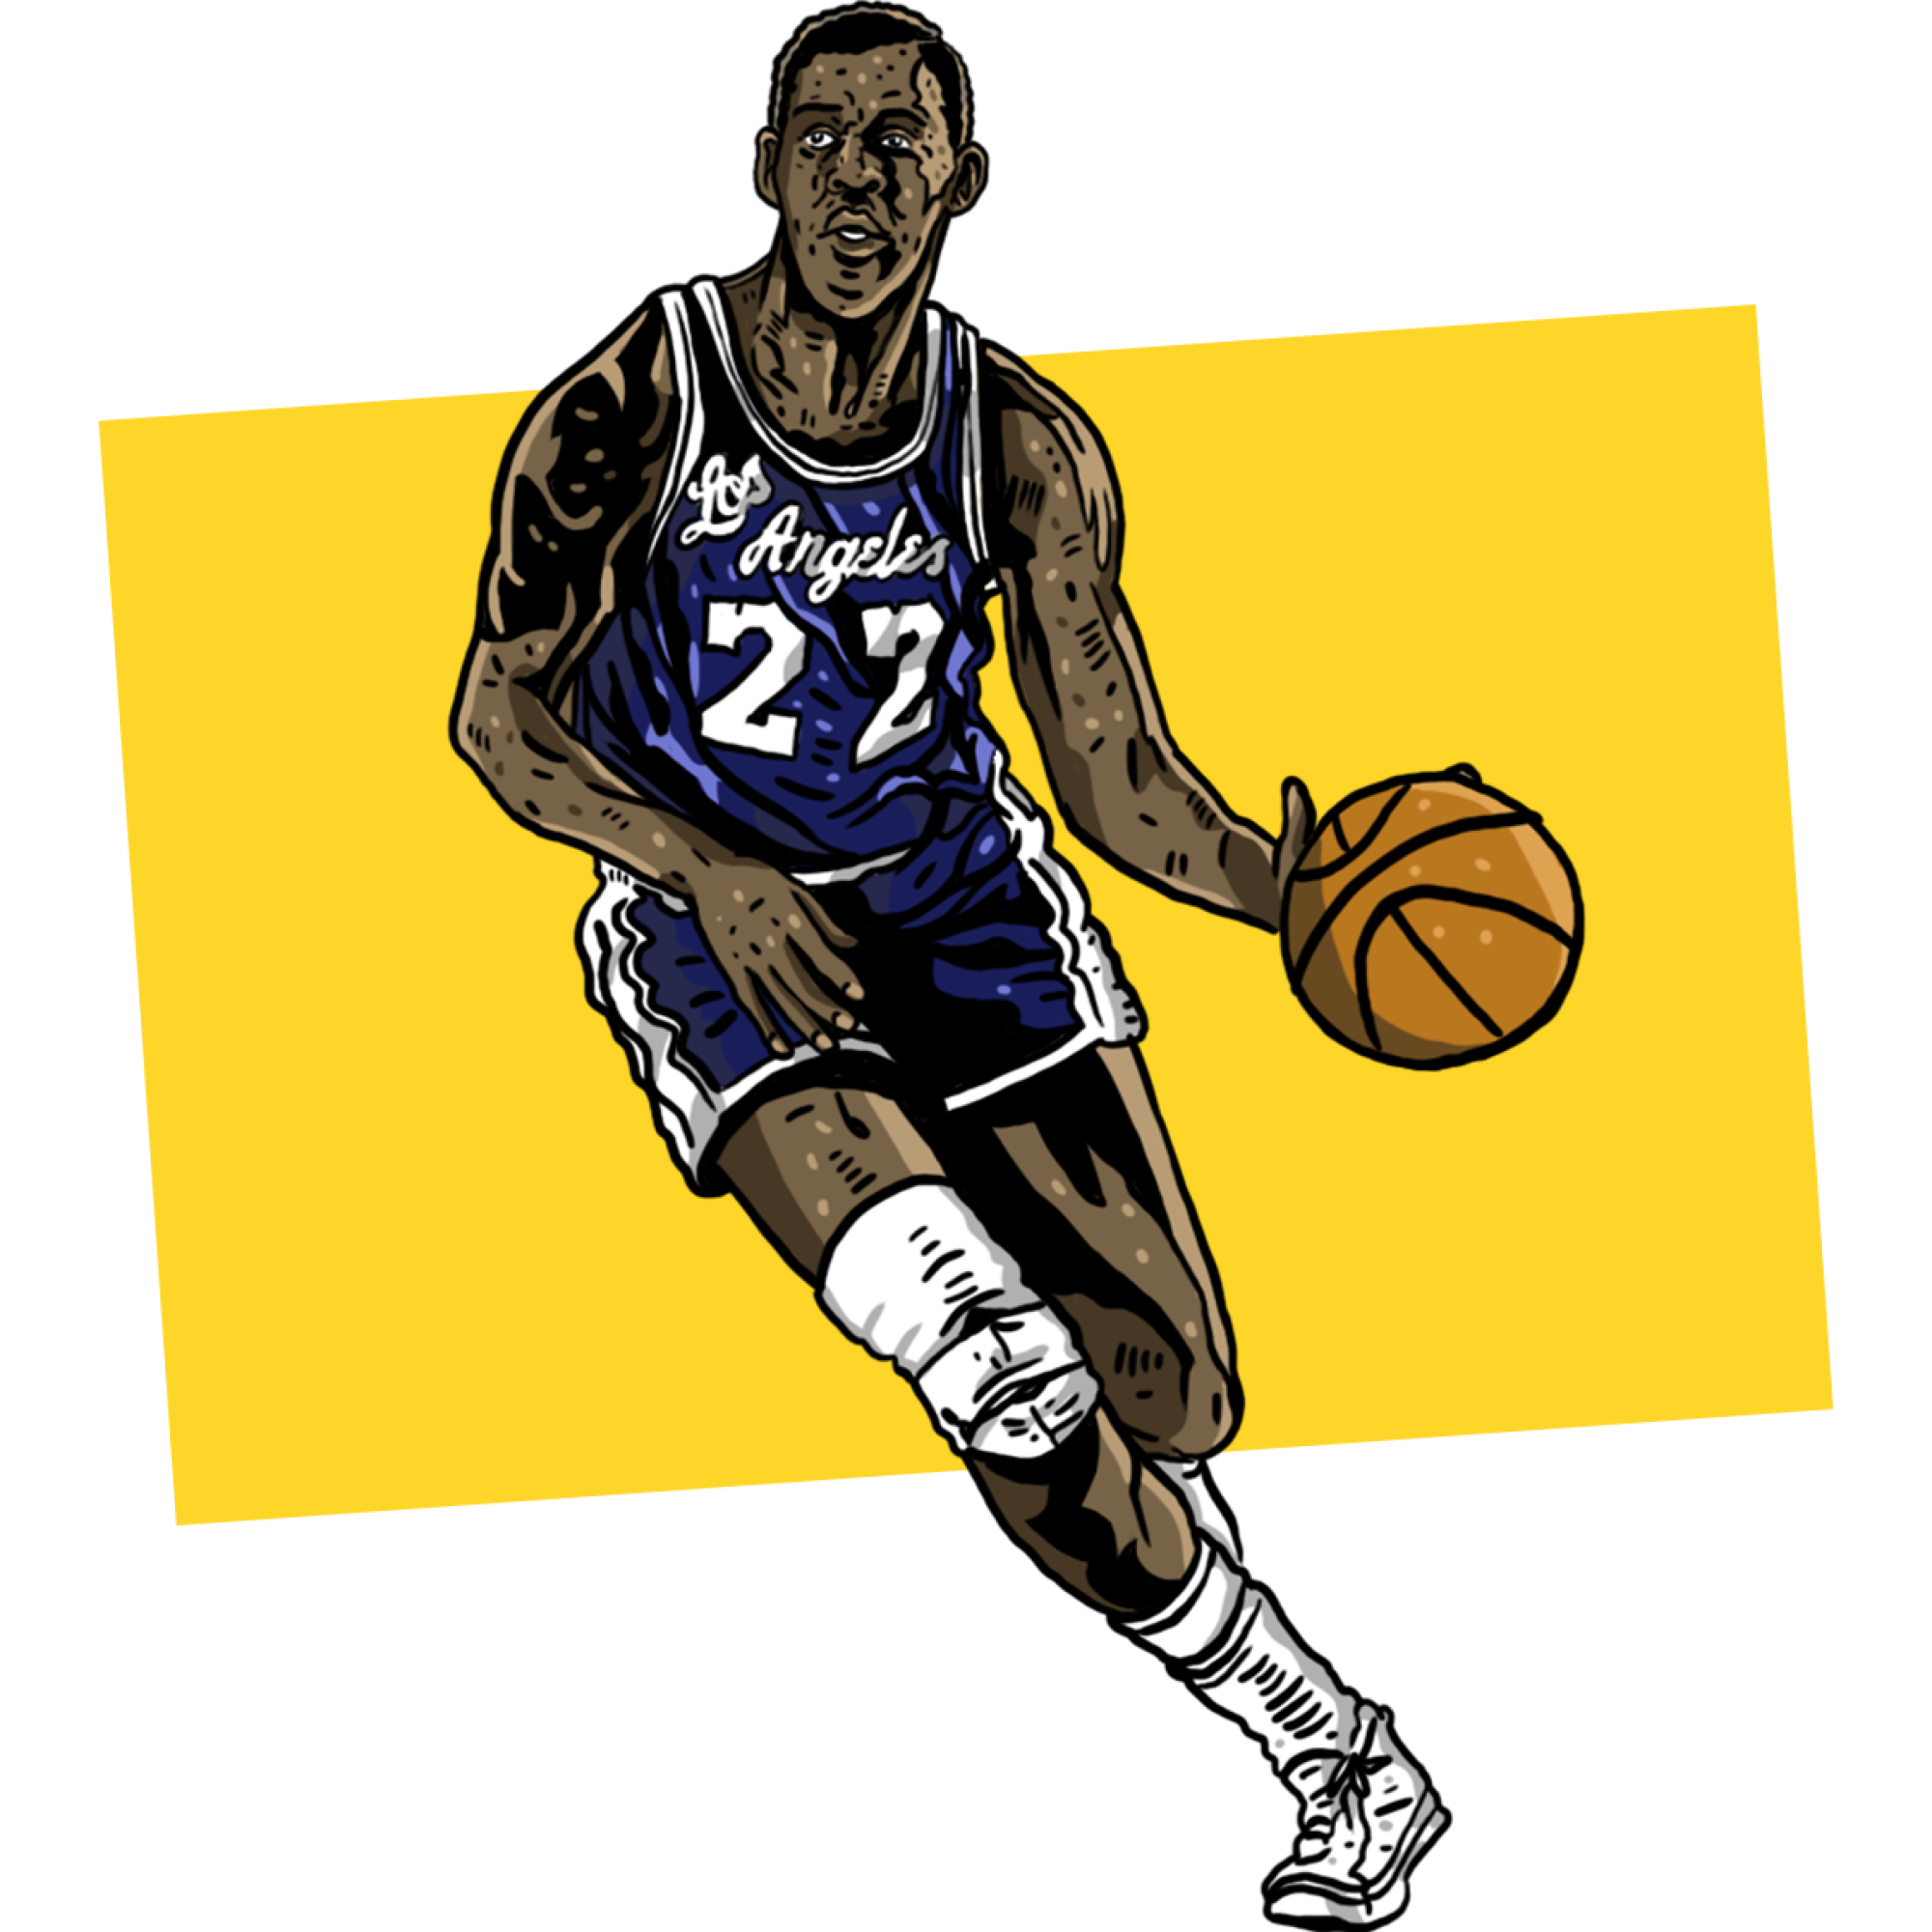 Illustration of Elgin Baylor in a #22 jersey dribbling the ball.